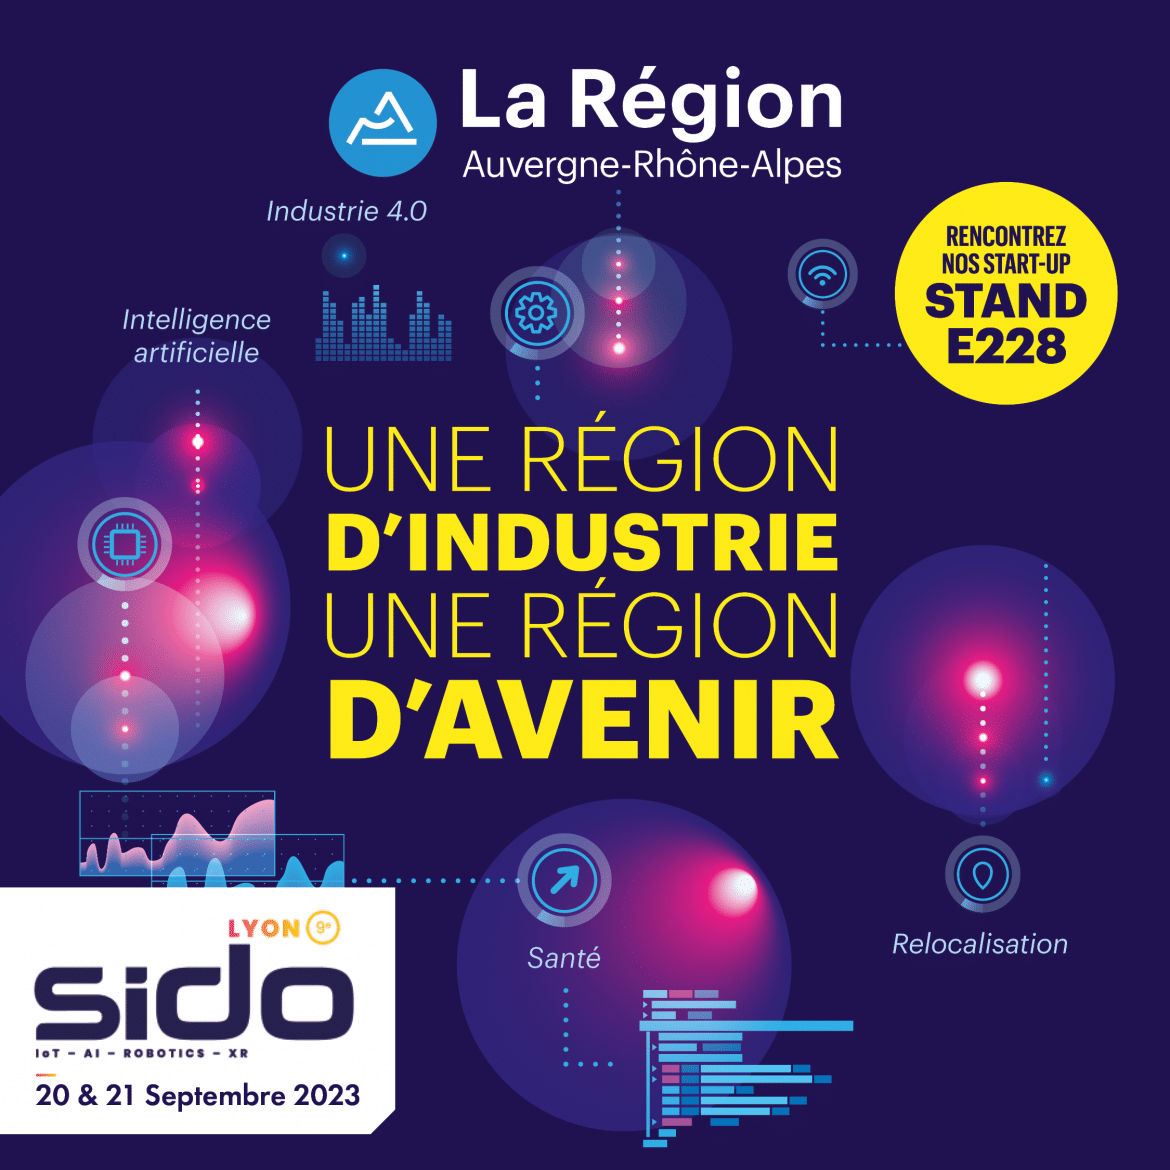 SIDO will be taking place on 20 and 21 September in Lyon! Effidence will be present on the Auvergne-Rhône-Alpes Region stand.